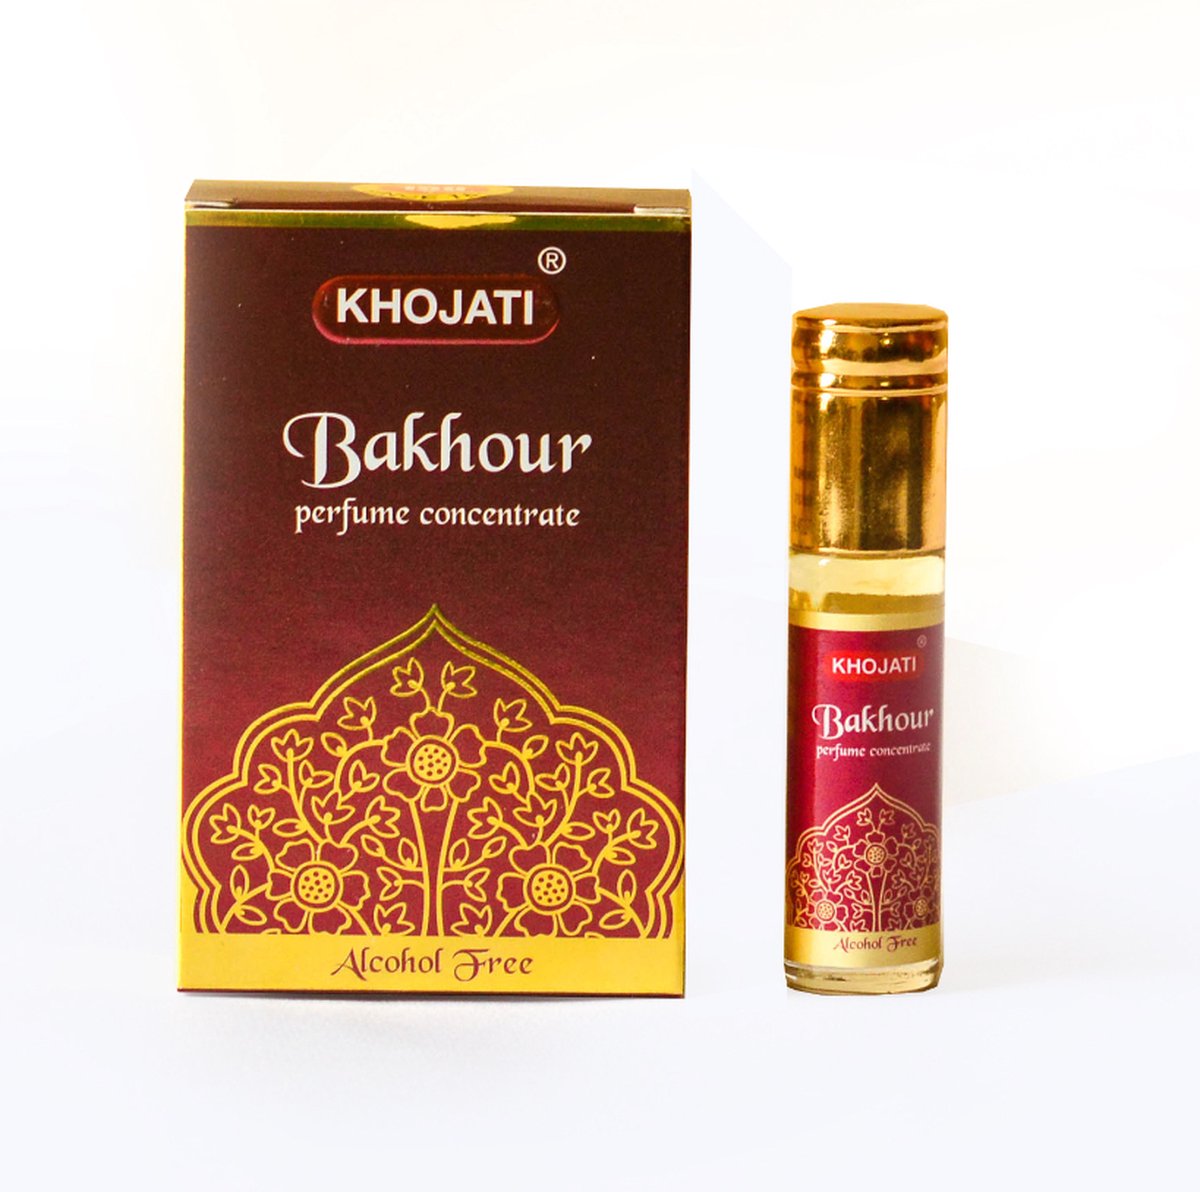 Kveda - Bakhour perfume concentrate - Alcohol free - Net Content 6 ml - Iconic Brand